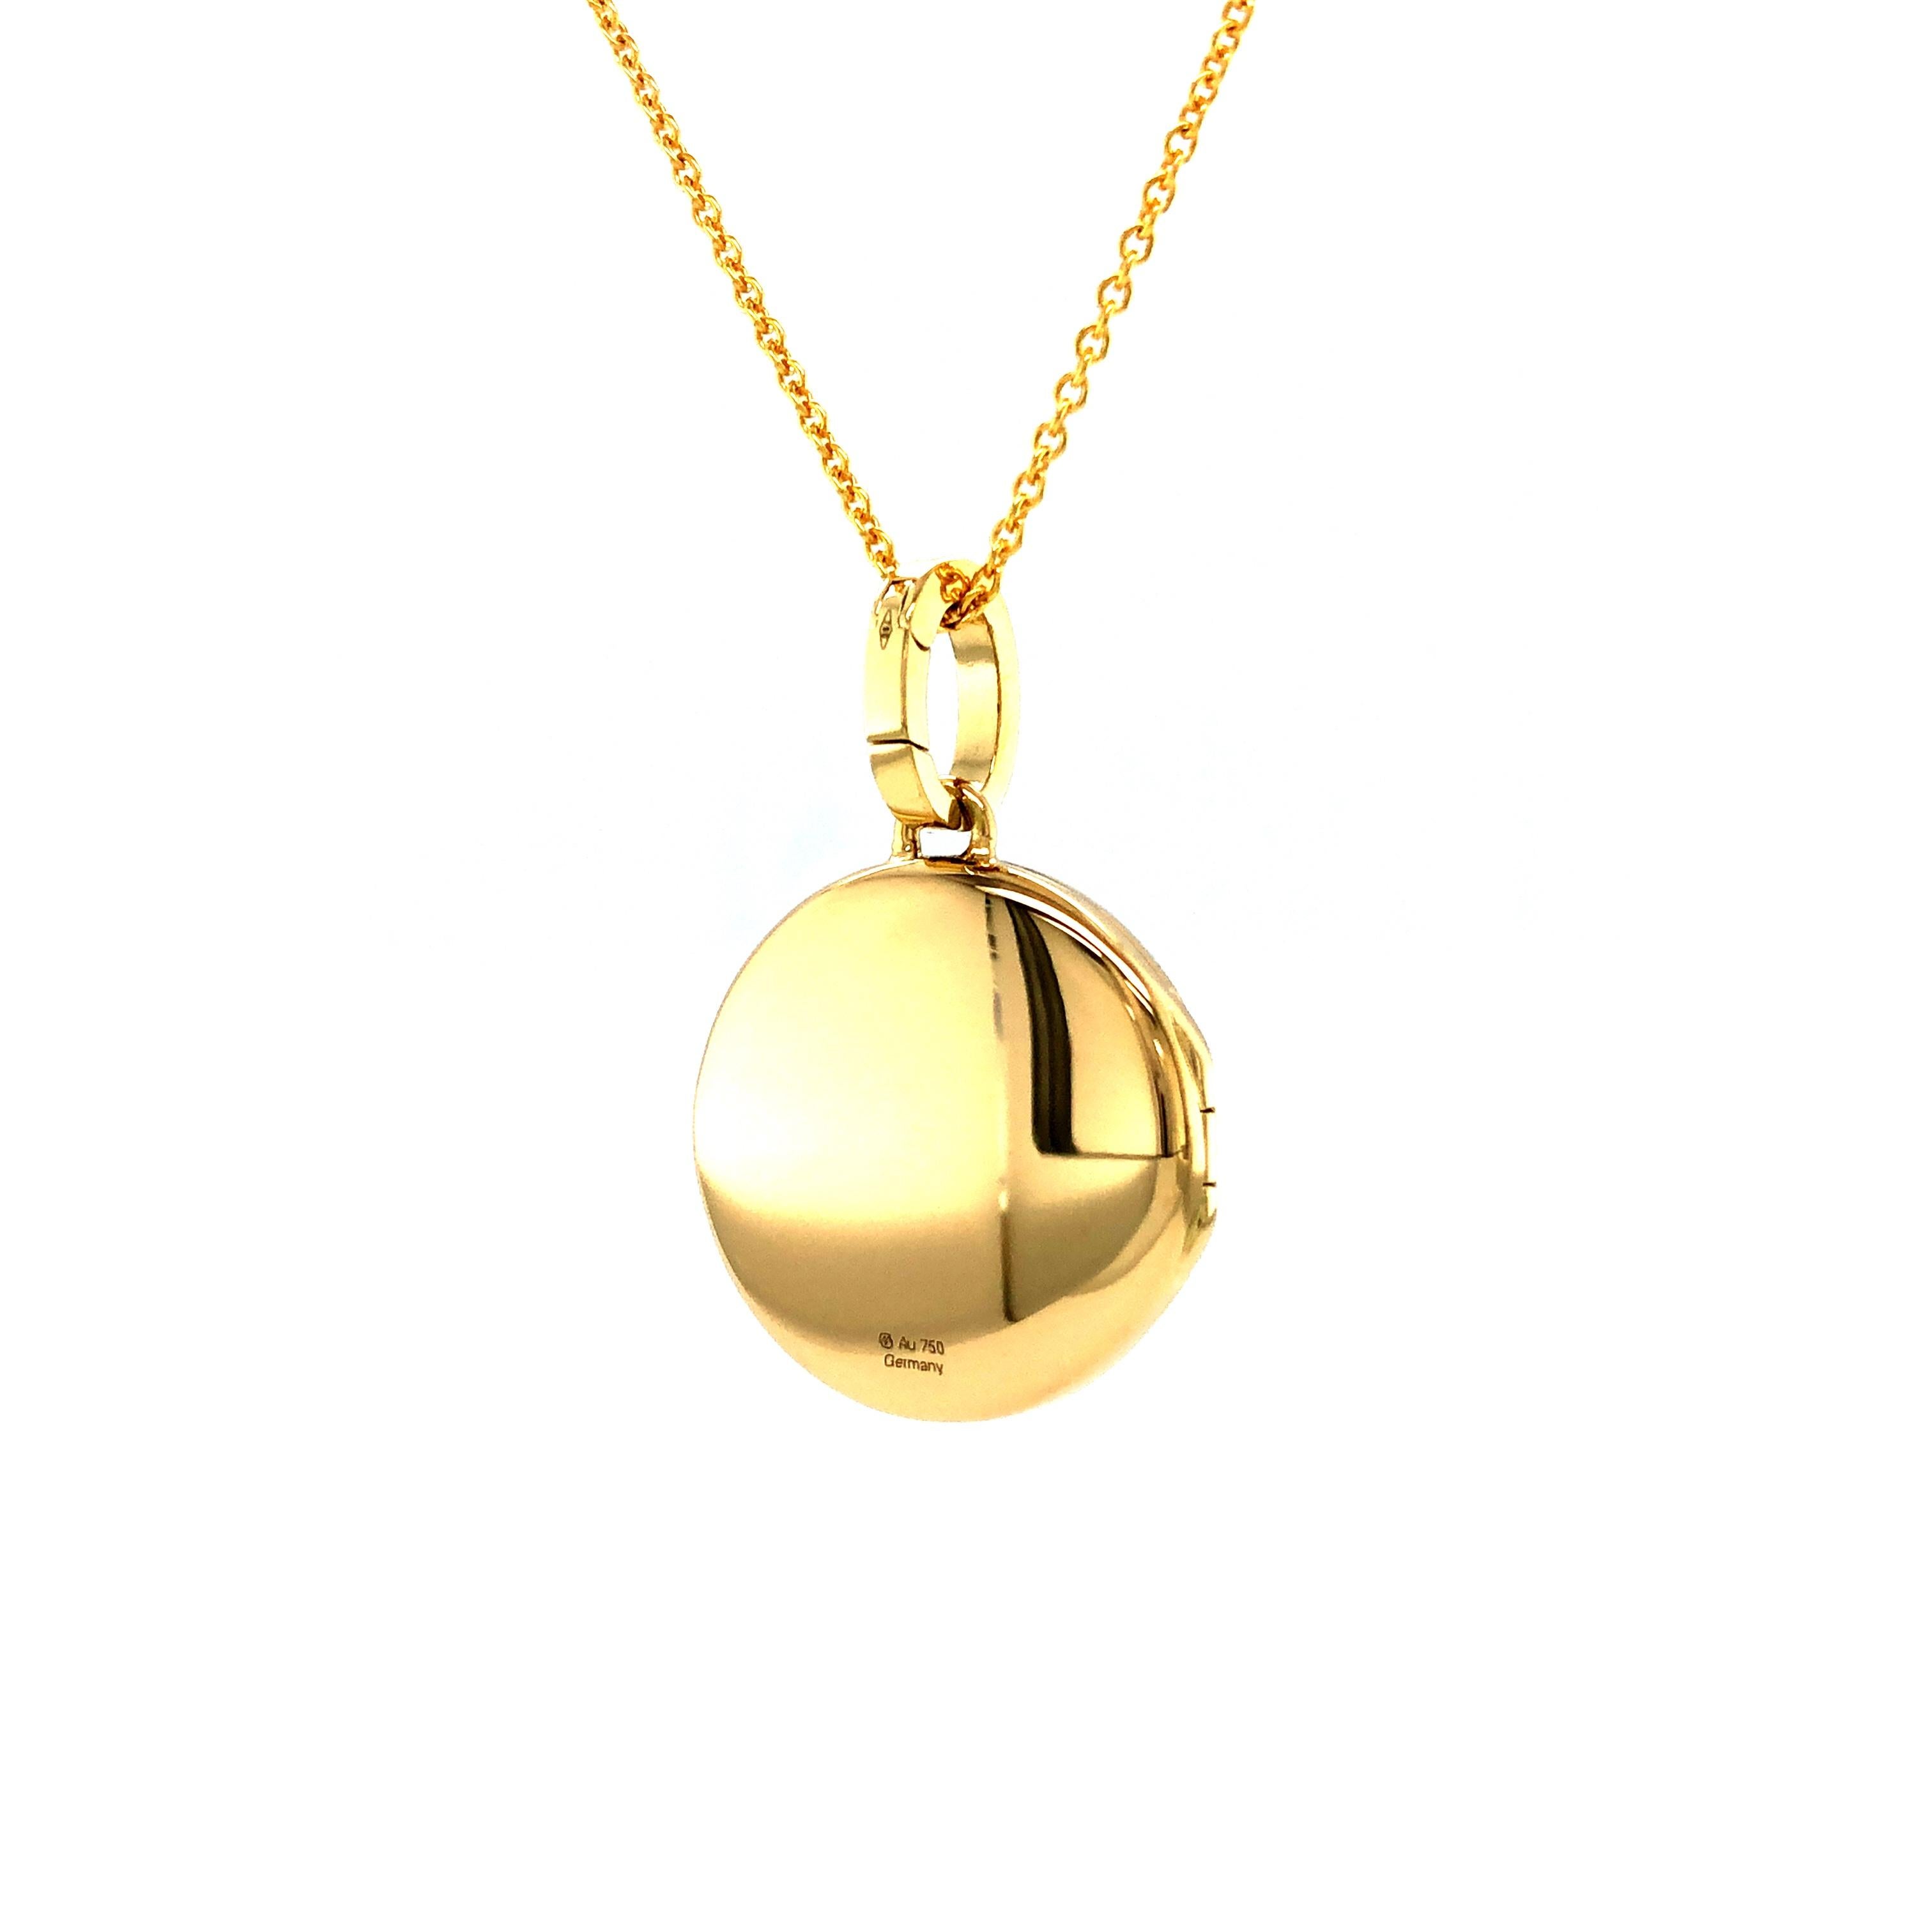 Customizable Round Polished Pendant Locket - 18k Yellow Gold - Diameter 21.0 mm In New Condition For Sale In Pforzheim, DE